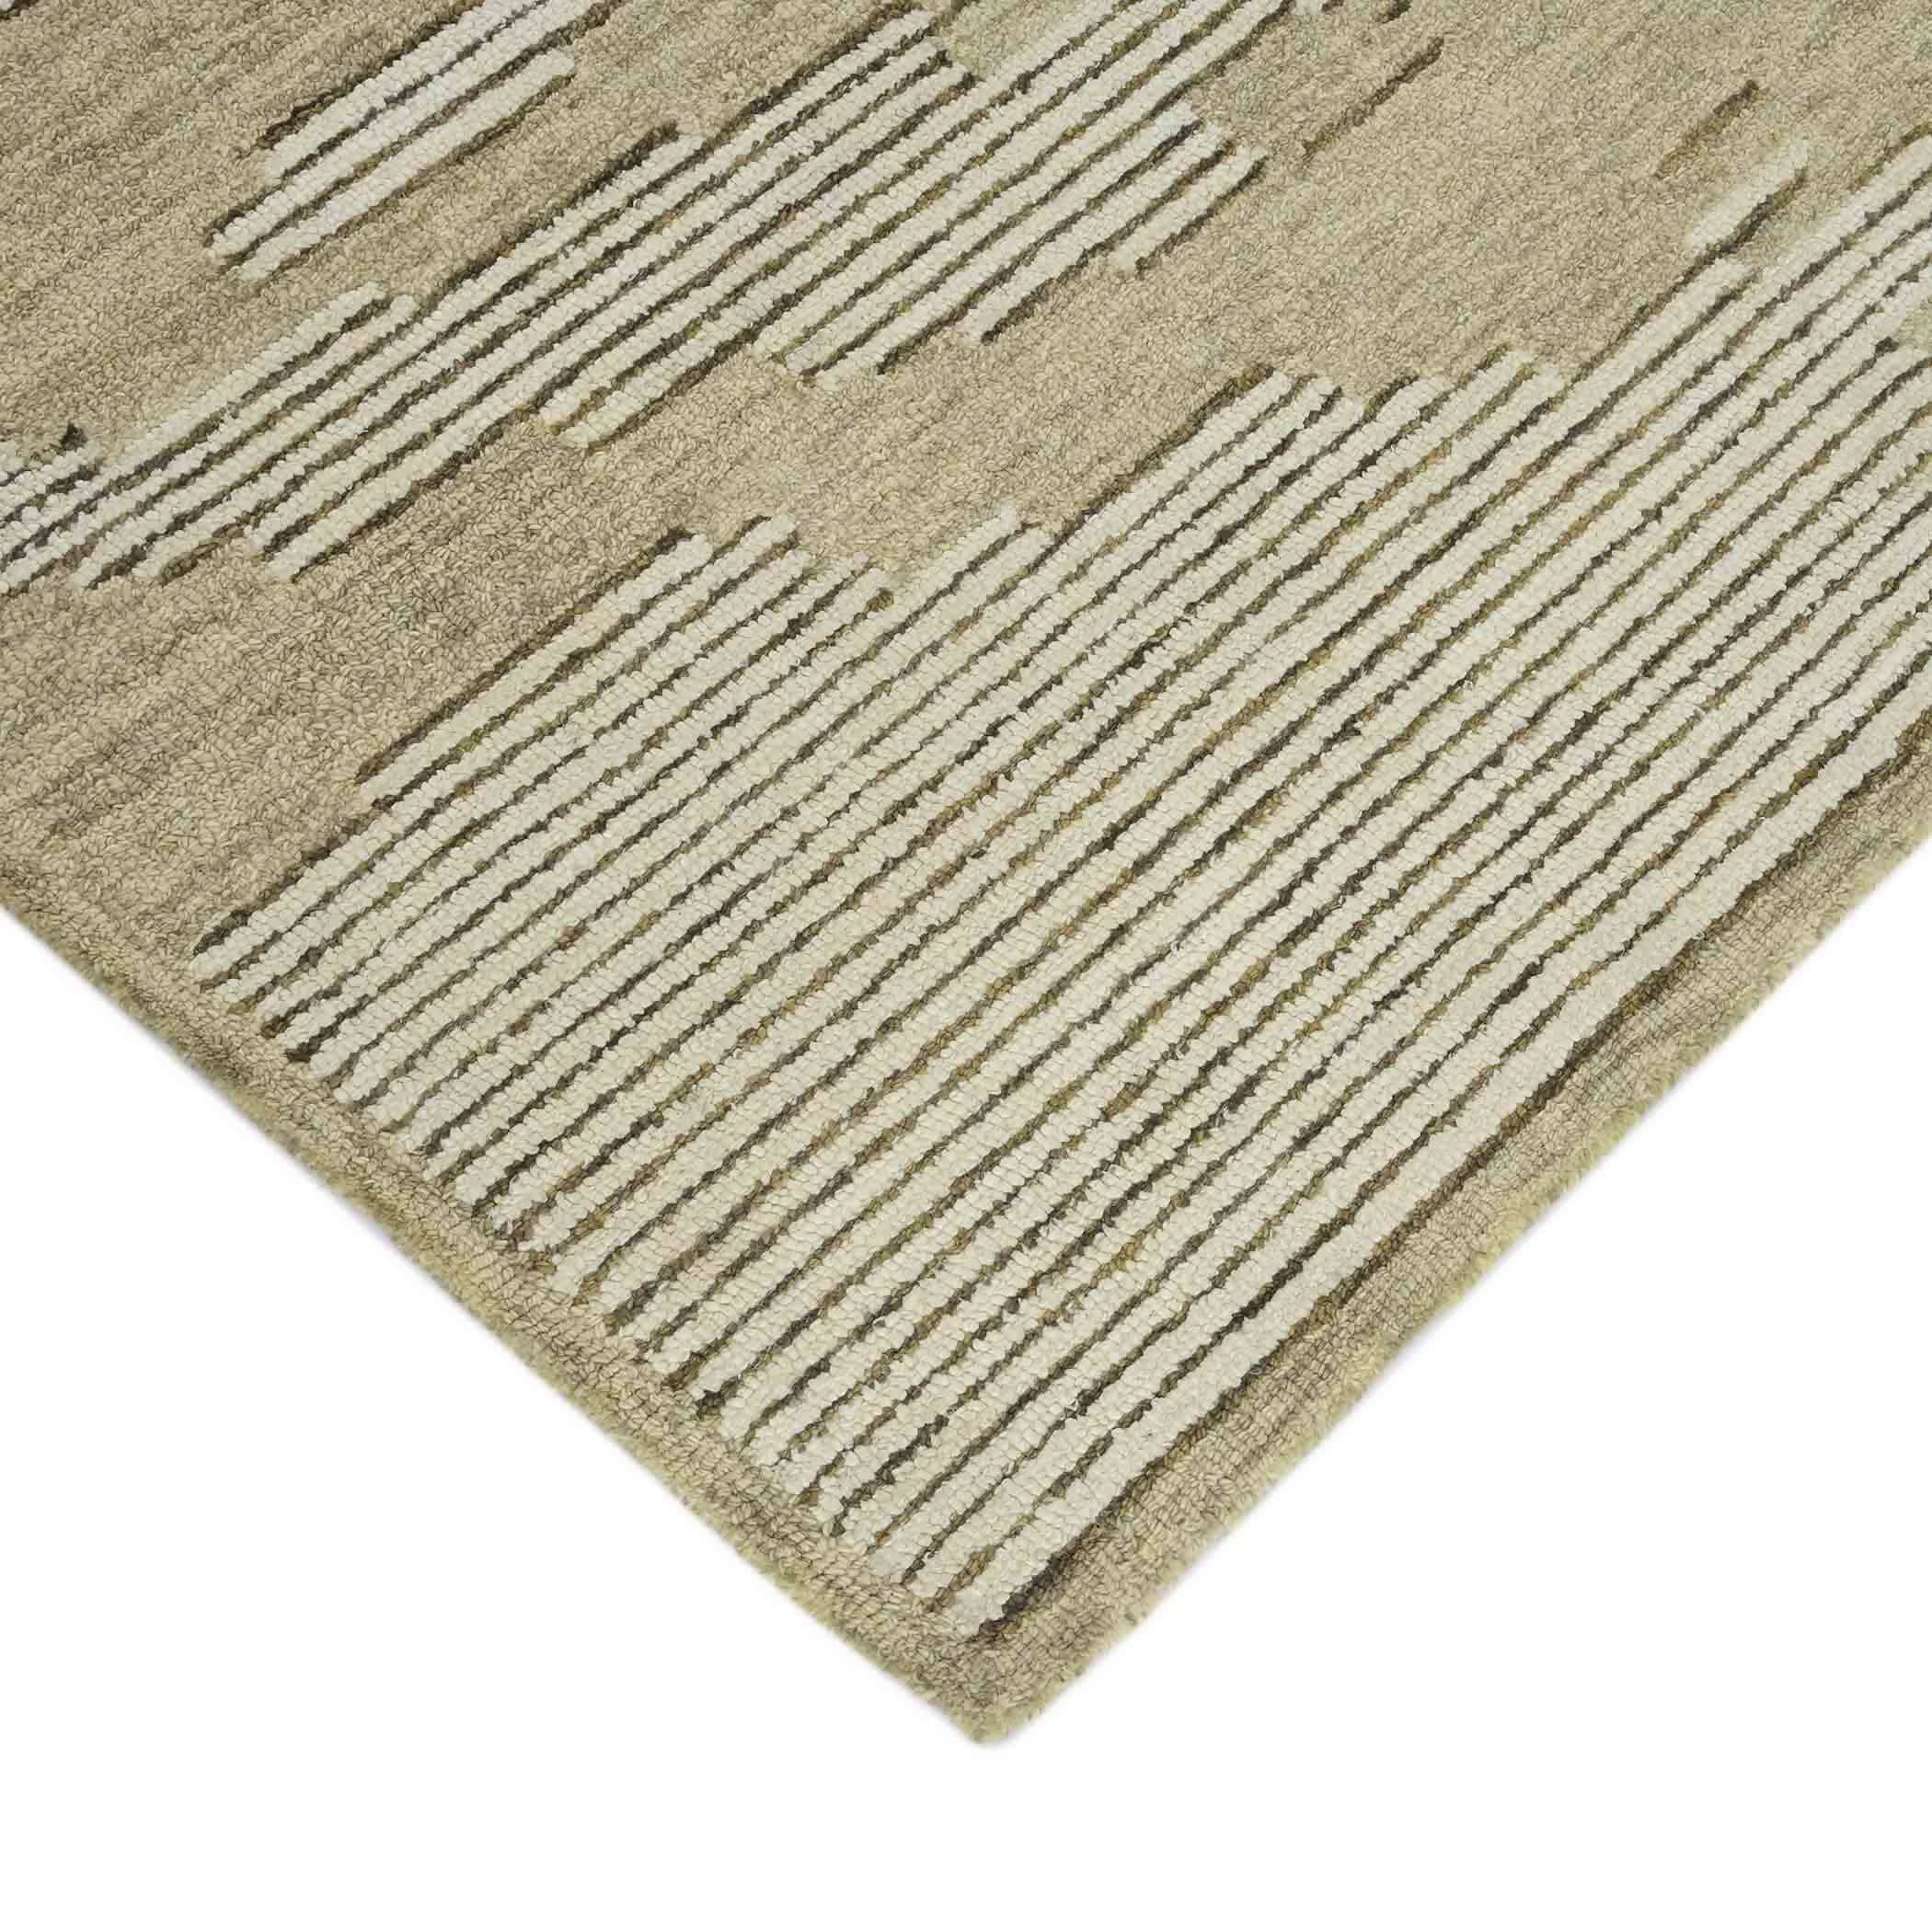 Ivory Wool Chicago 8x10 Feet Hand-Tufted Carpet Rug